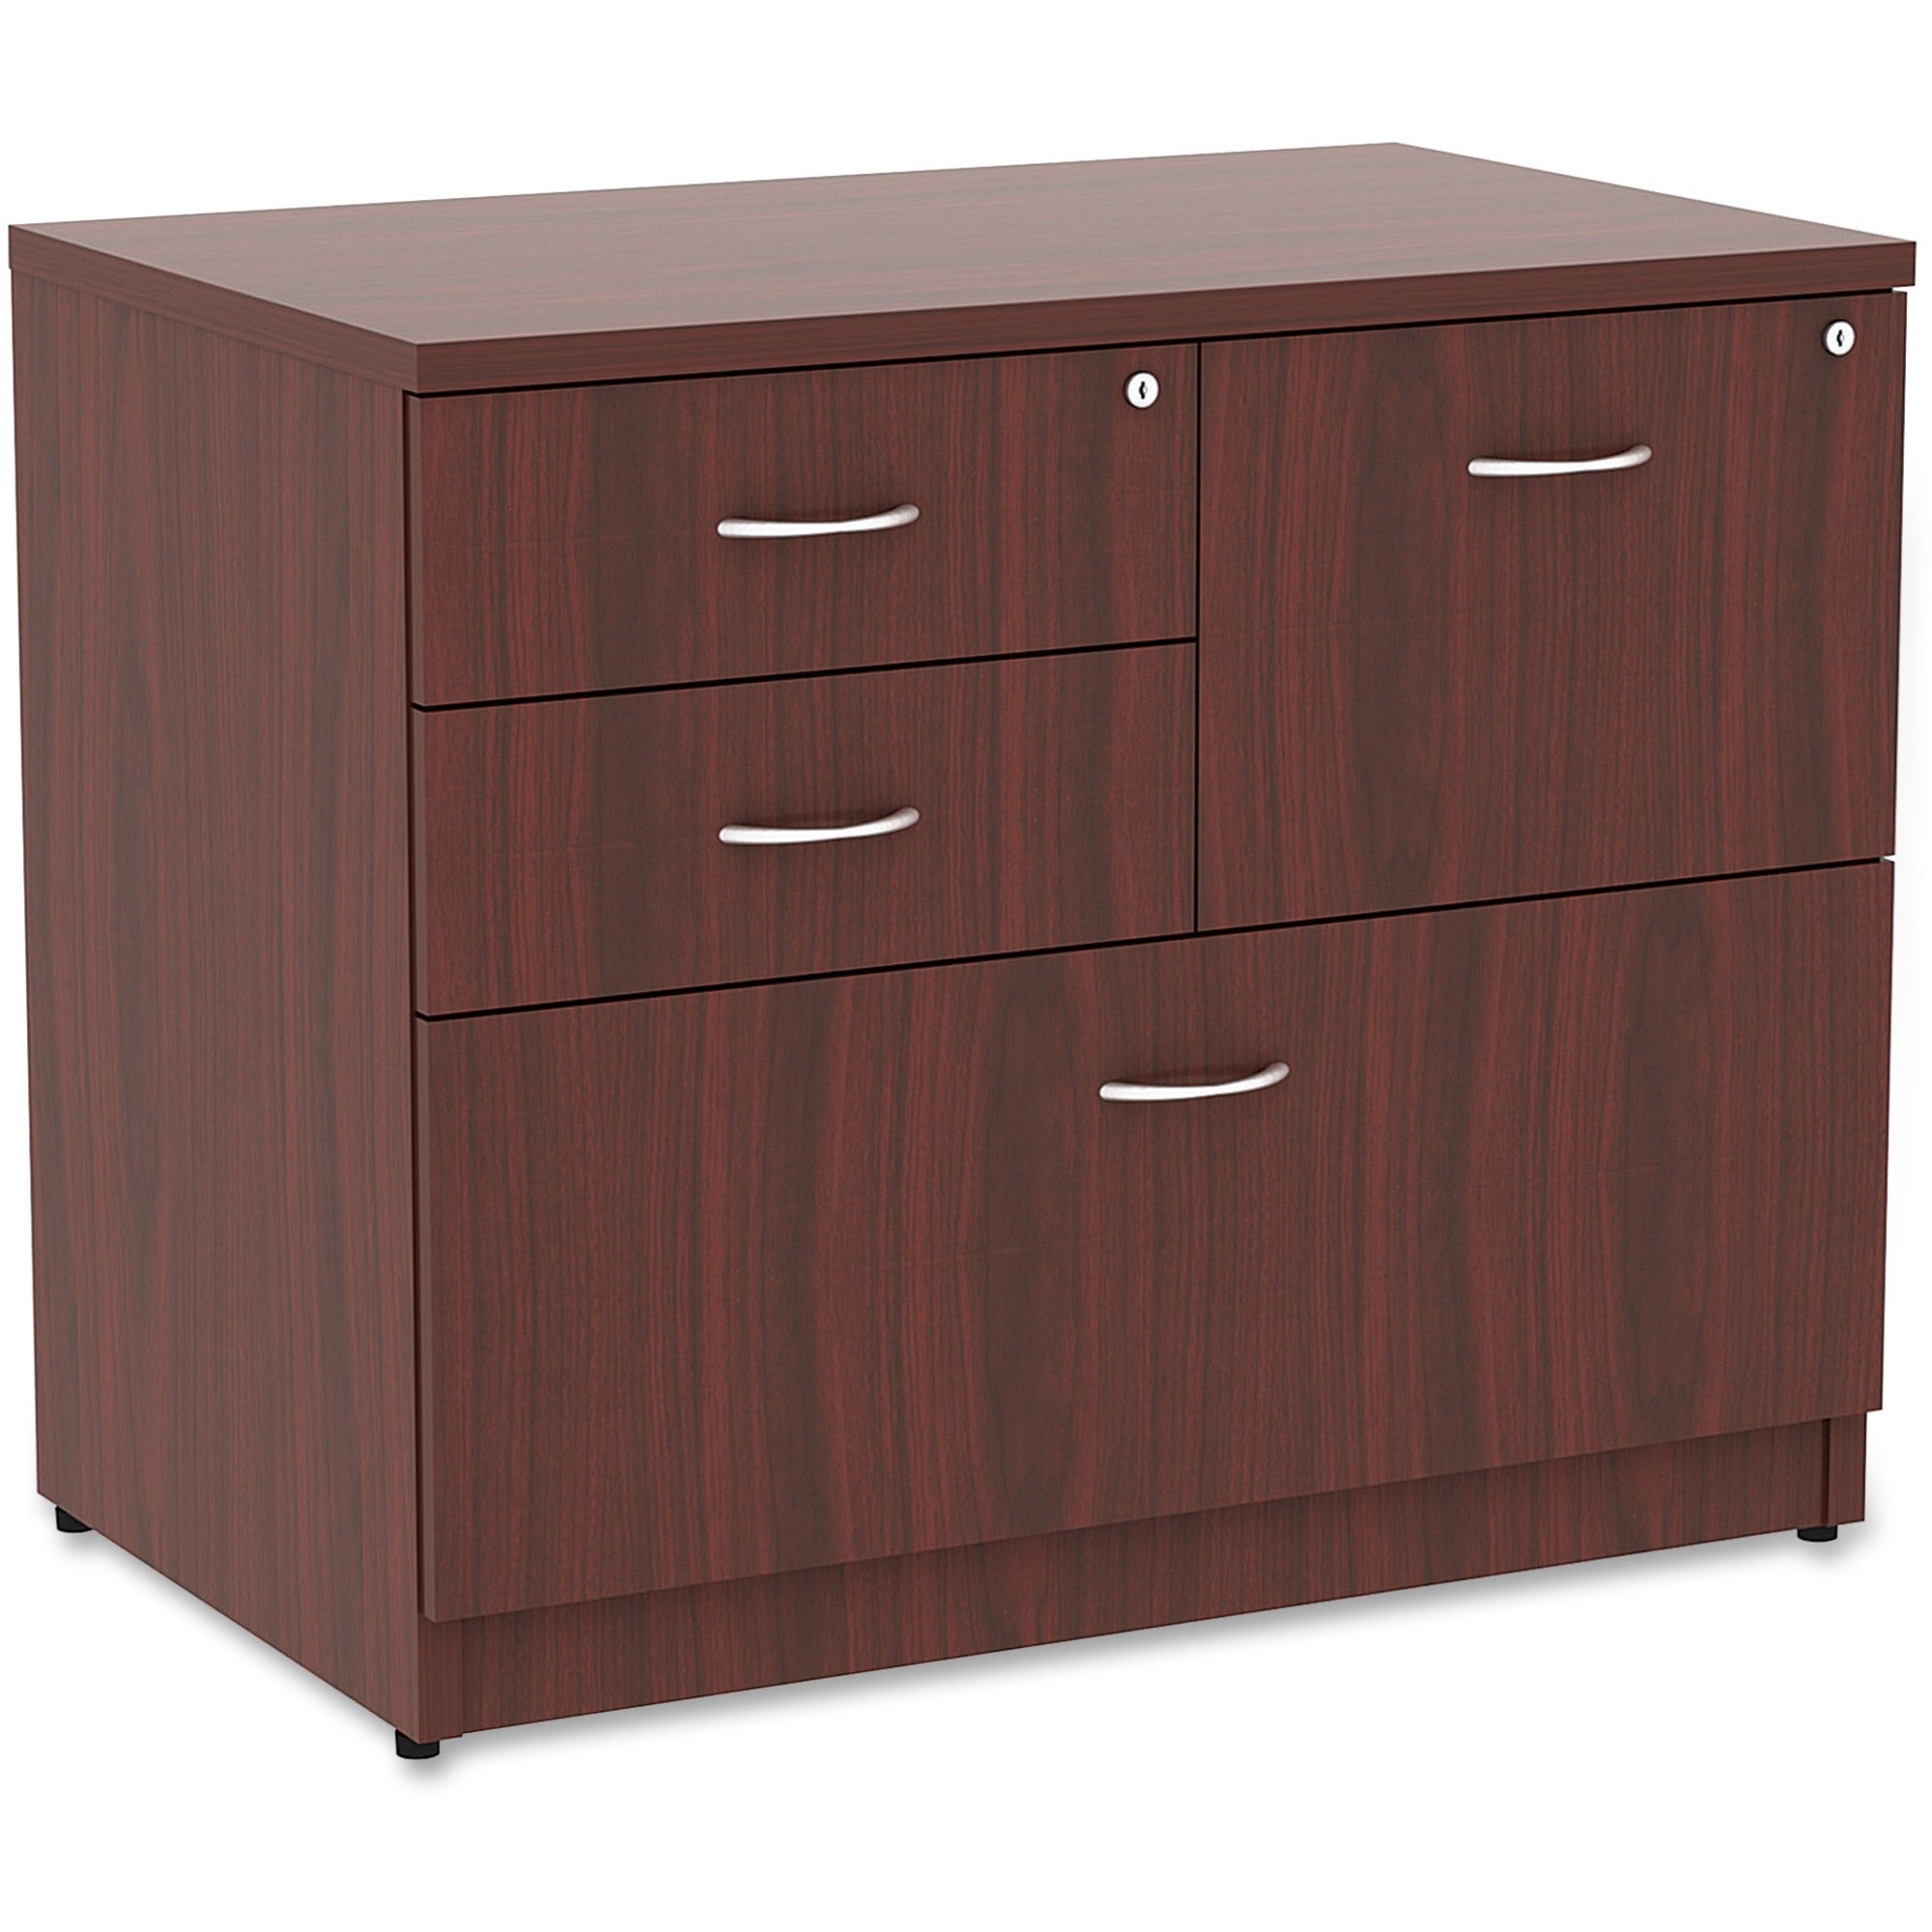 lorell-essentials-series-box-box-file-lateral-file-1-side-panel-01-edge-355-x-22295-lateral-file-4-x-box-file-drawers-mahogany-laminate-table-top-versatile-ball-bearing-glide-drawer-extension-security-lock-durable-adjustable_llr69541 - 1